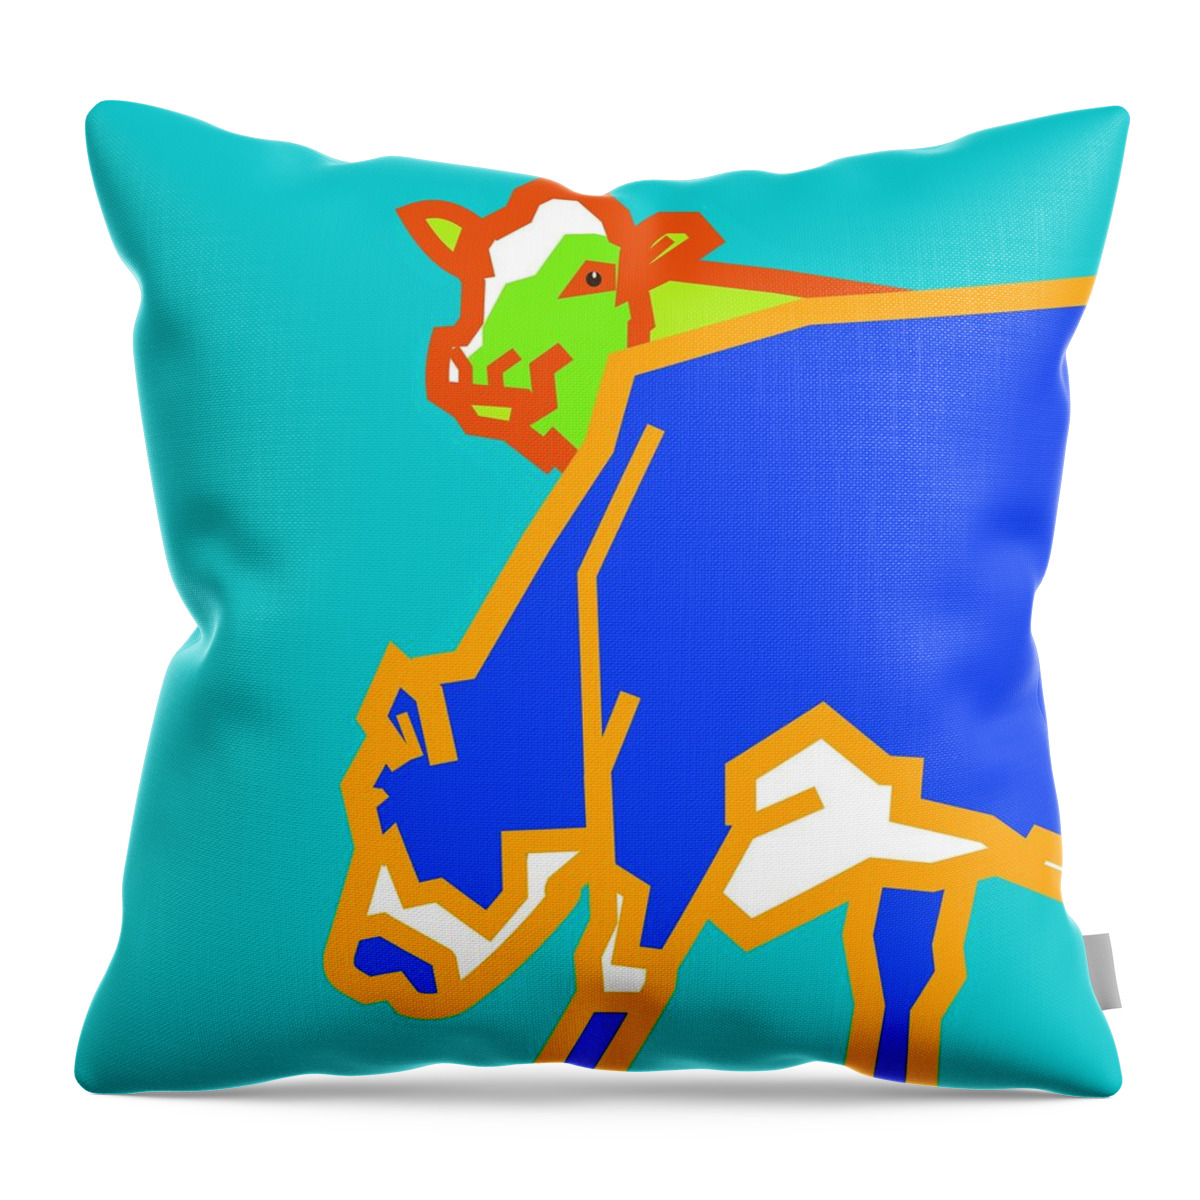 Cows Throw Pillow featuring the digital art Cows by Fatline Graphic Art